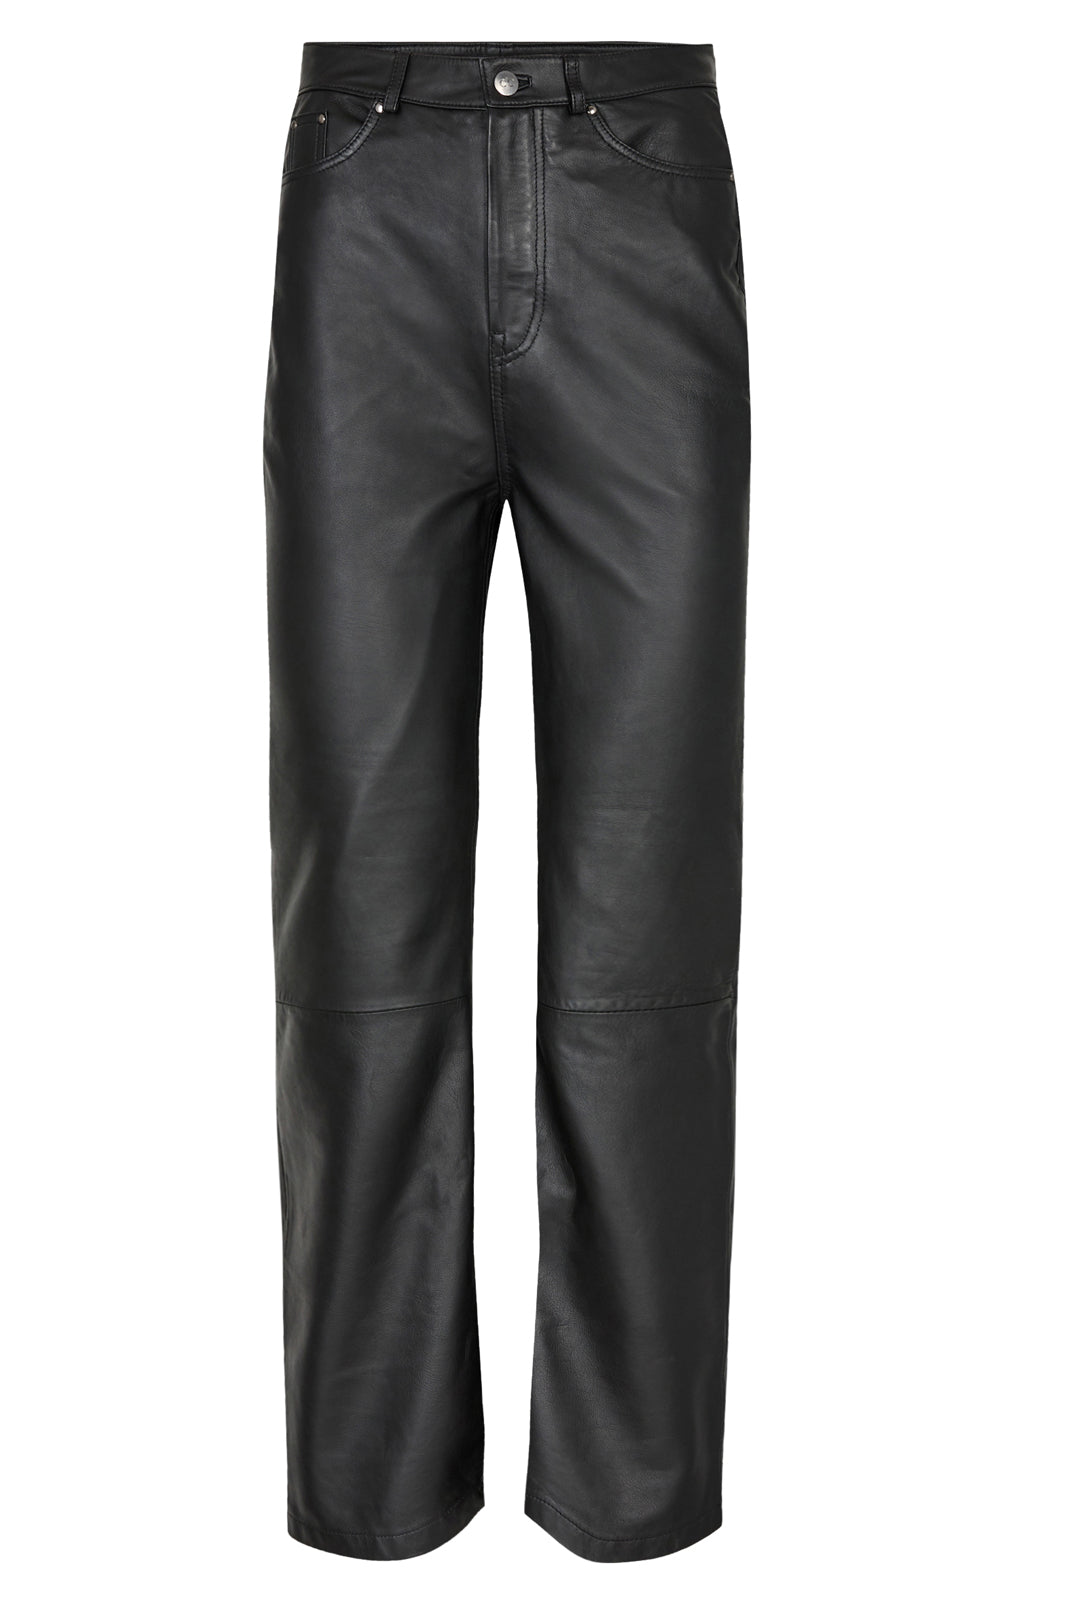 Co'couture - Vika Leather Jeans - Black 